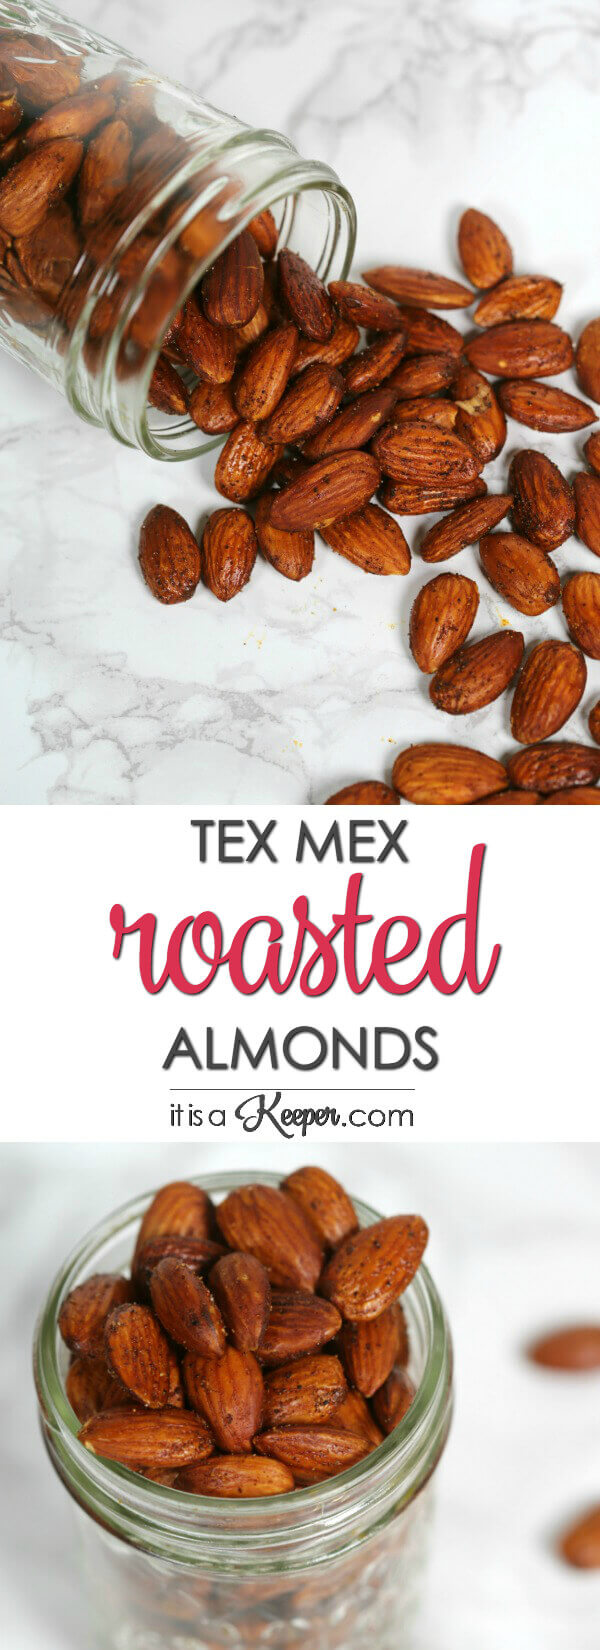 Top Photo: Tex Mex Roasted Almonds spilled on a marble table from a glass. Bottom Photo: Tex Mex Roasted Almonds in a tall glass.  